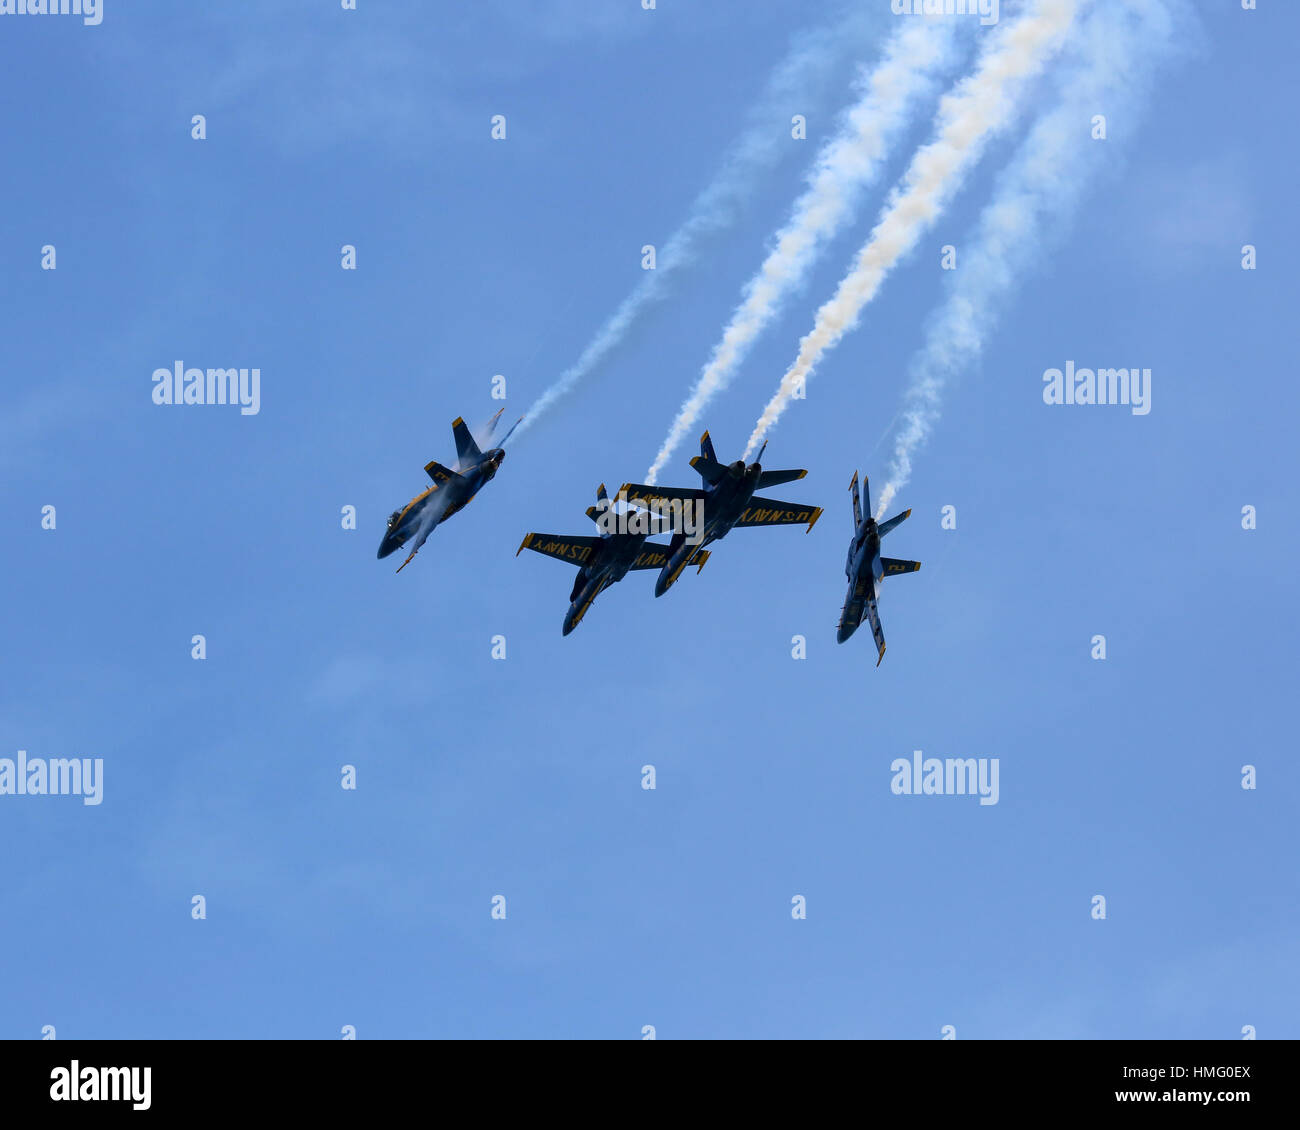 U.S. Navy Blue Angels aircraft breaking from diamond formation flight. Stock Photo